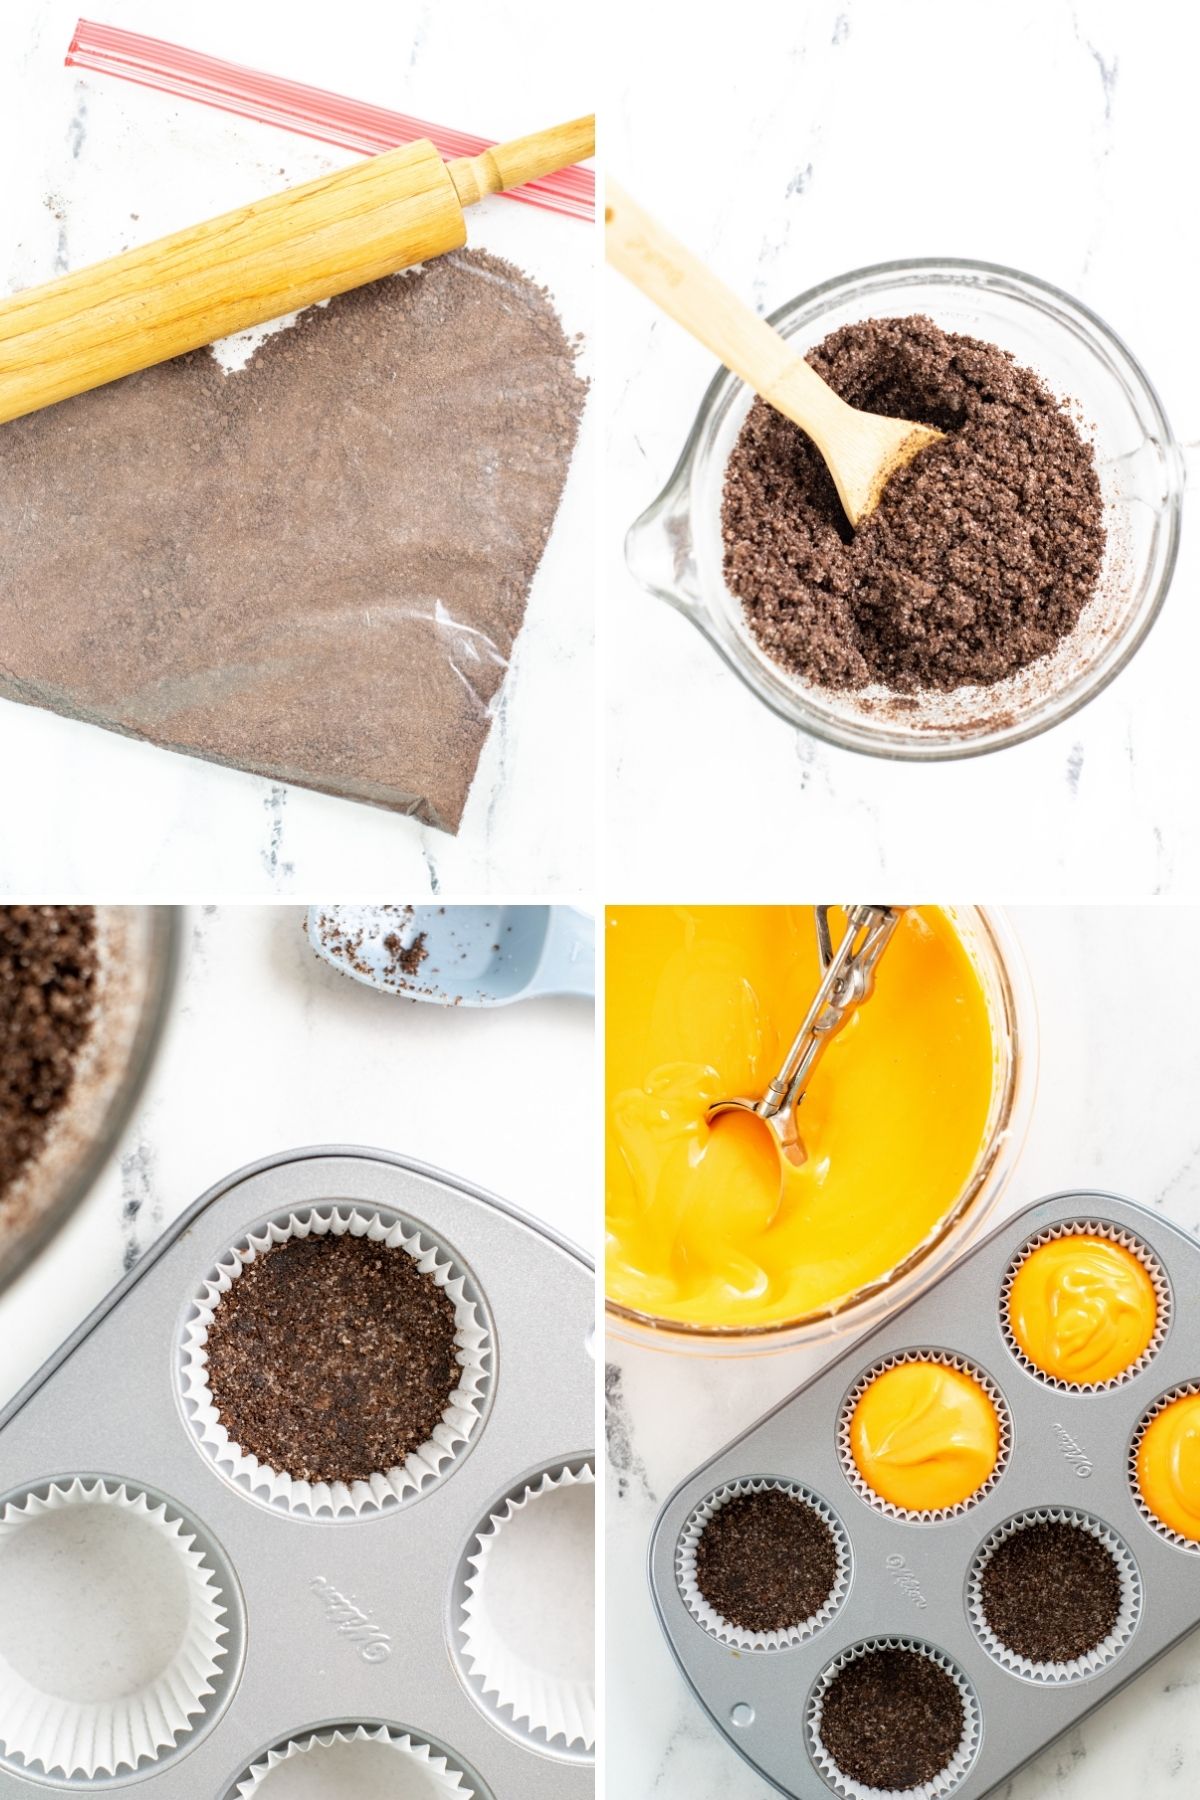 four pictures: gallon zipper baggie with chocolate crumbs and rolling pin; chocolate crumbs and melted butter; chocolate crumbs in the bottom of a cupcake liner; orange cheesecake filling with cookie scoop and placed on top of cookie crumbs